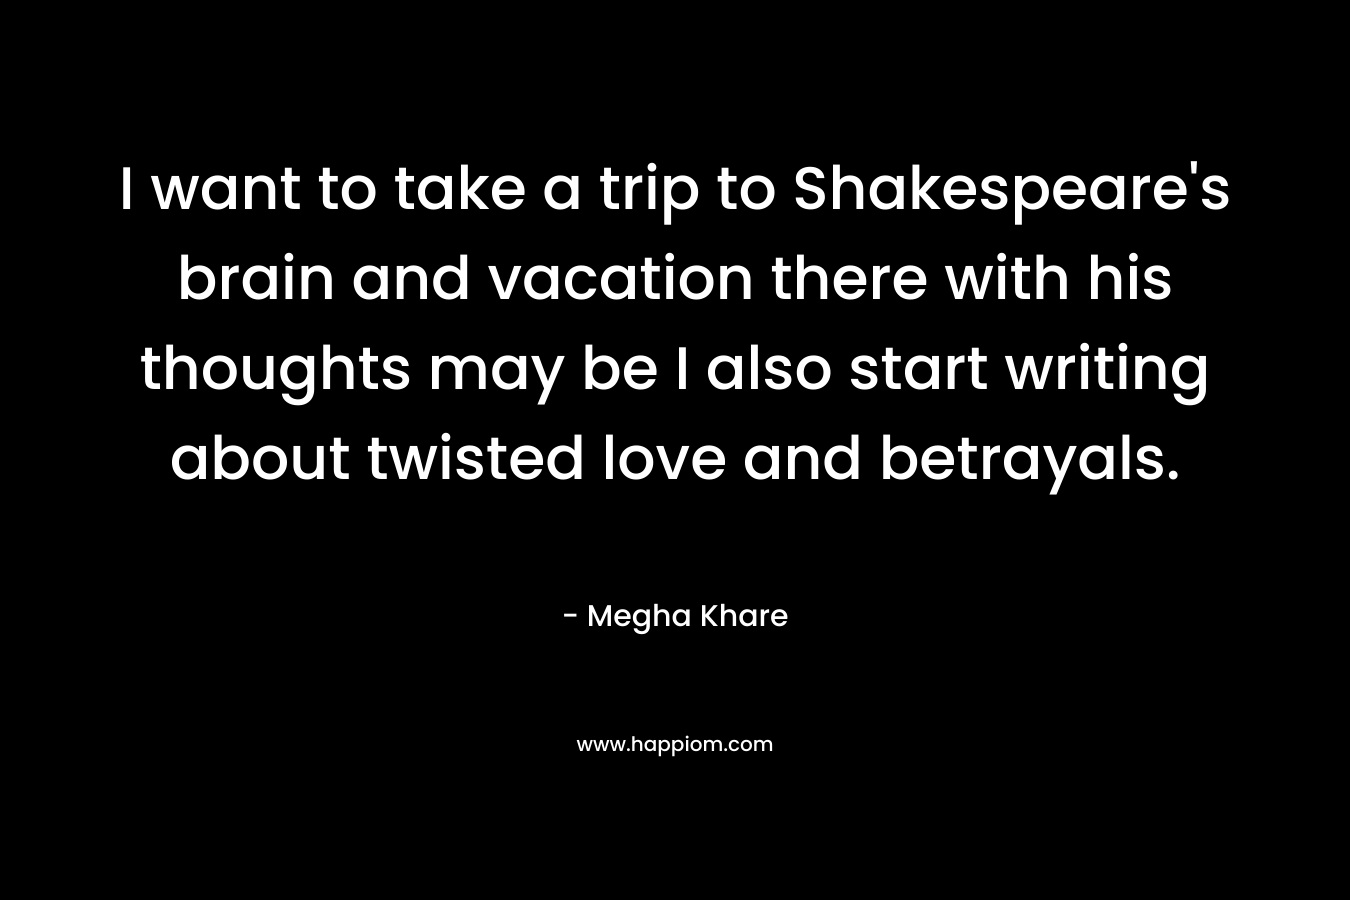 I want to take a trip to Shakespeare's brain and vacation there with his thoughts may be I also start writing about twisted love and betrayals.